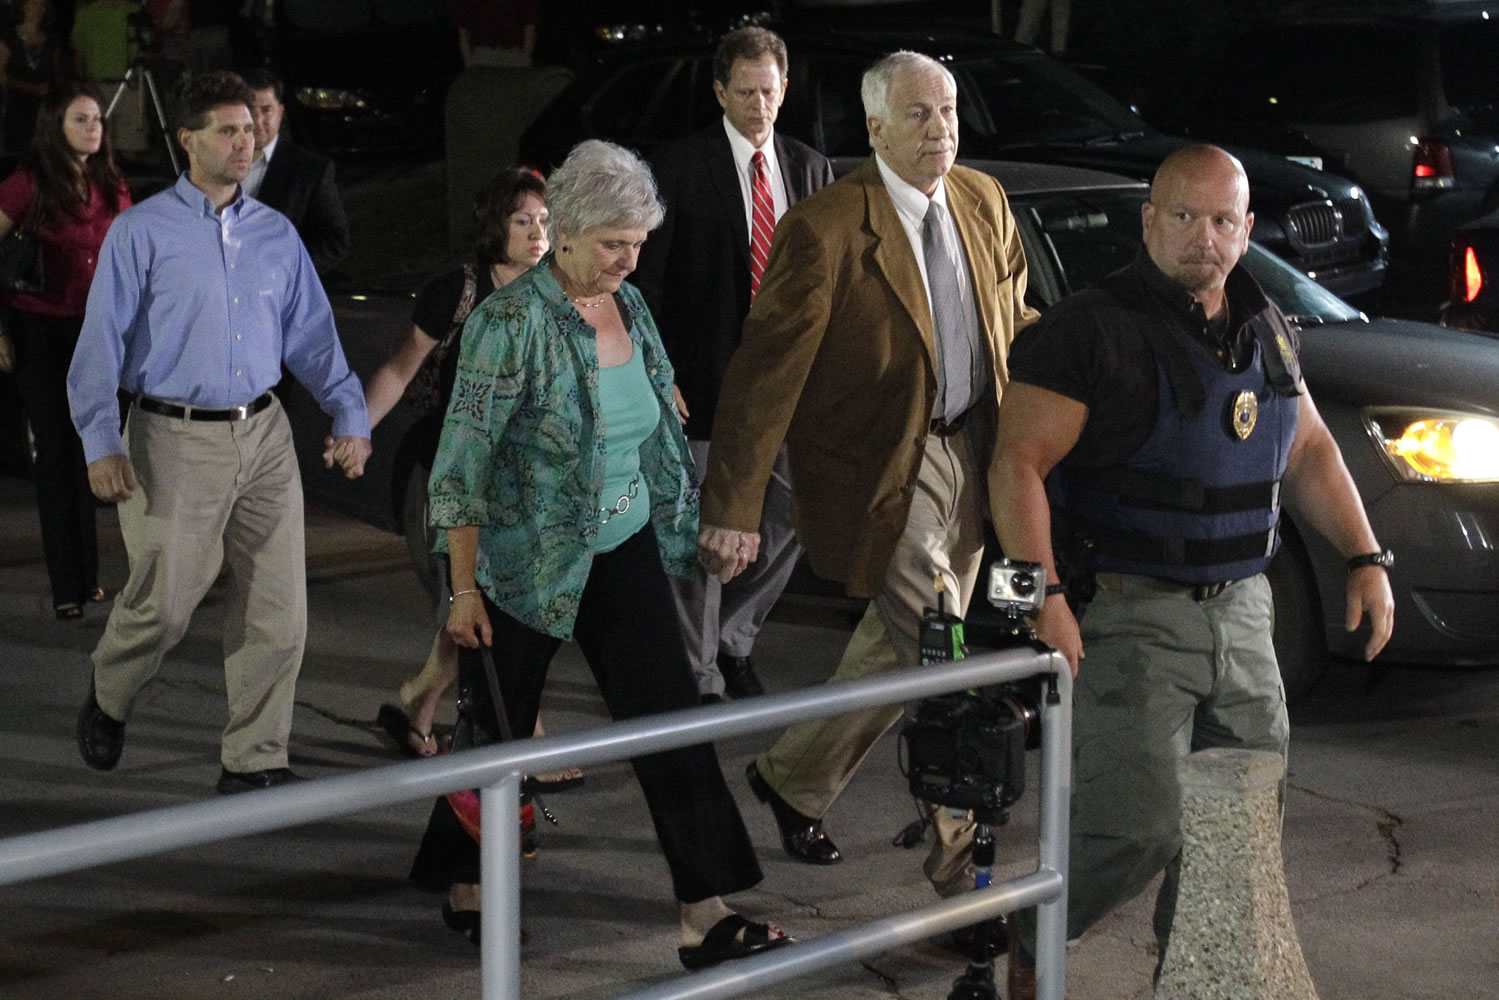 Former Penn State University assistant football coach Jerry Sandusky, right center, arrives with his wife Dottie, left center, at the Centre County Courthouse in Bellefonte, Pa., on Friday..